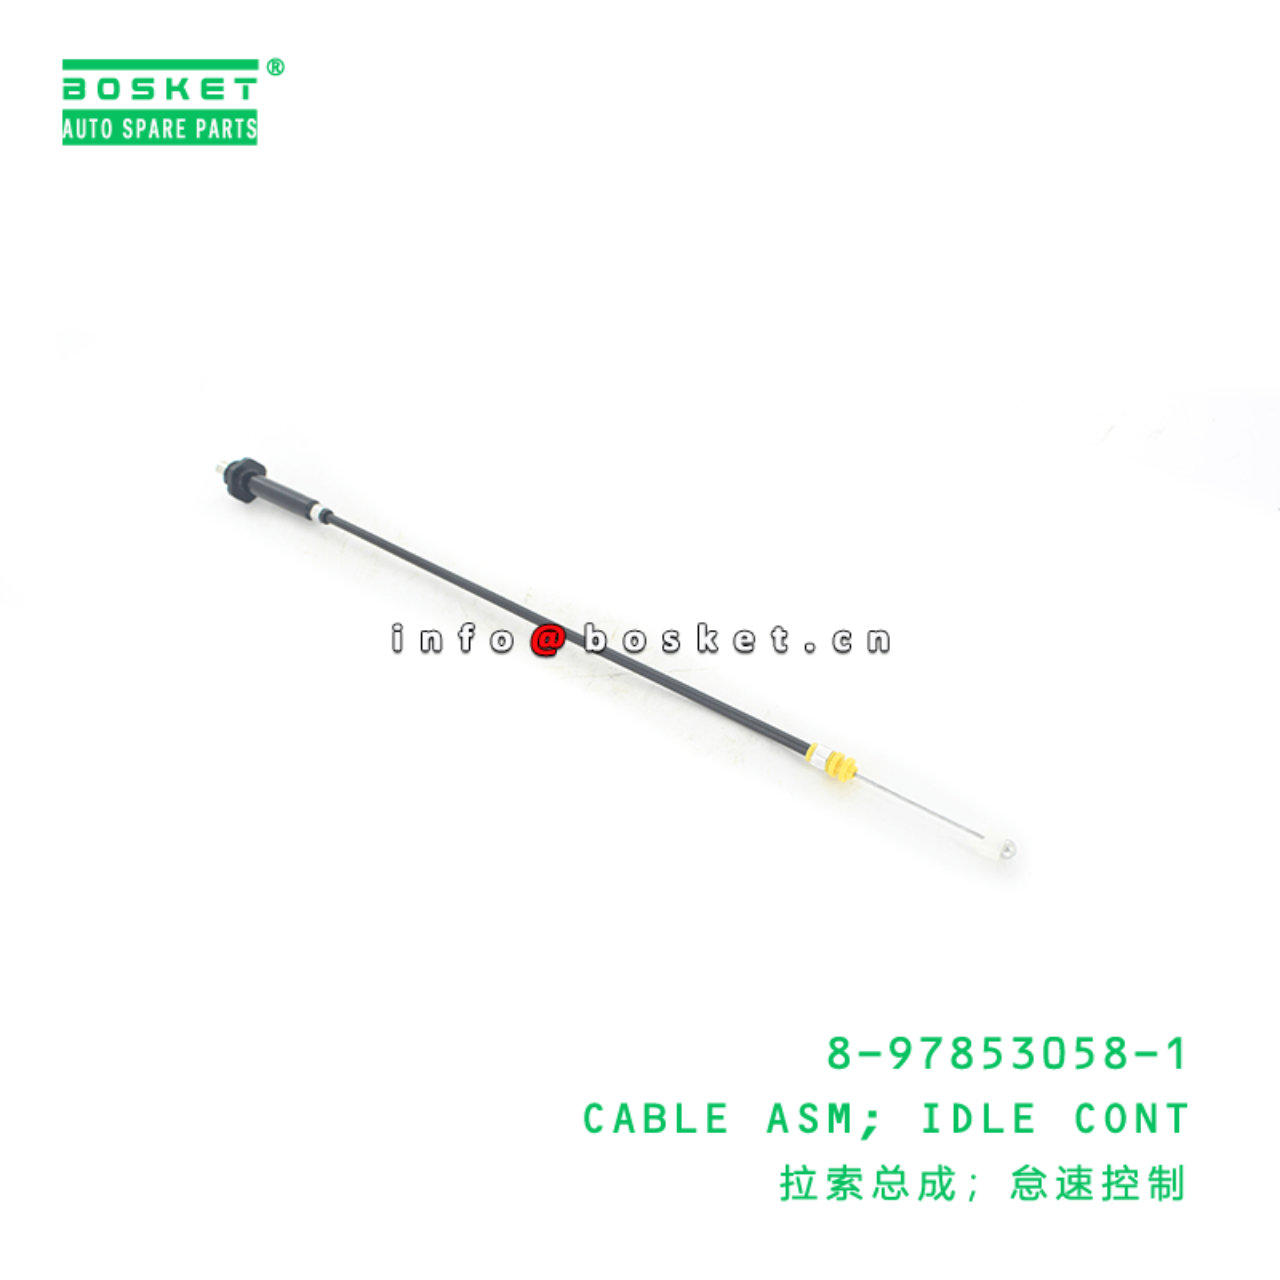 8-97853058-1 Idle Control Cable Assembly 8978530581 Suitable for ISUZU NHR NKR NPR